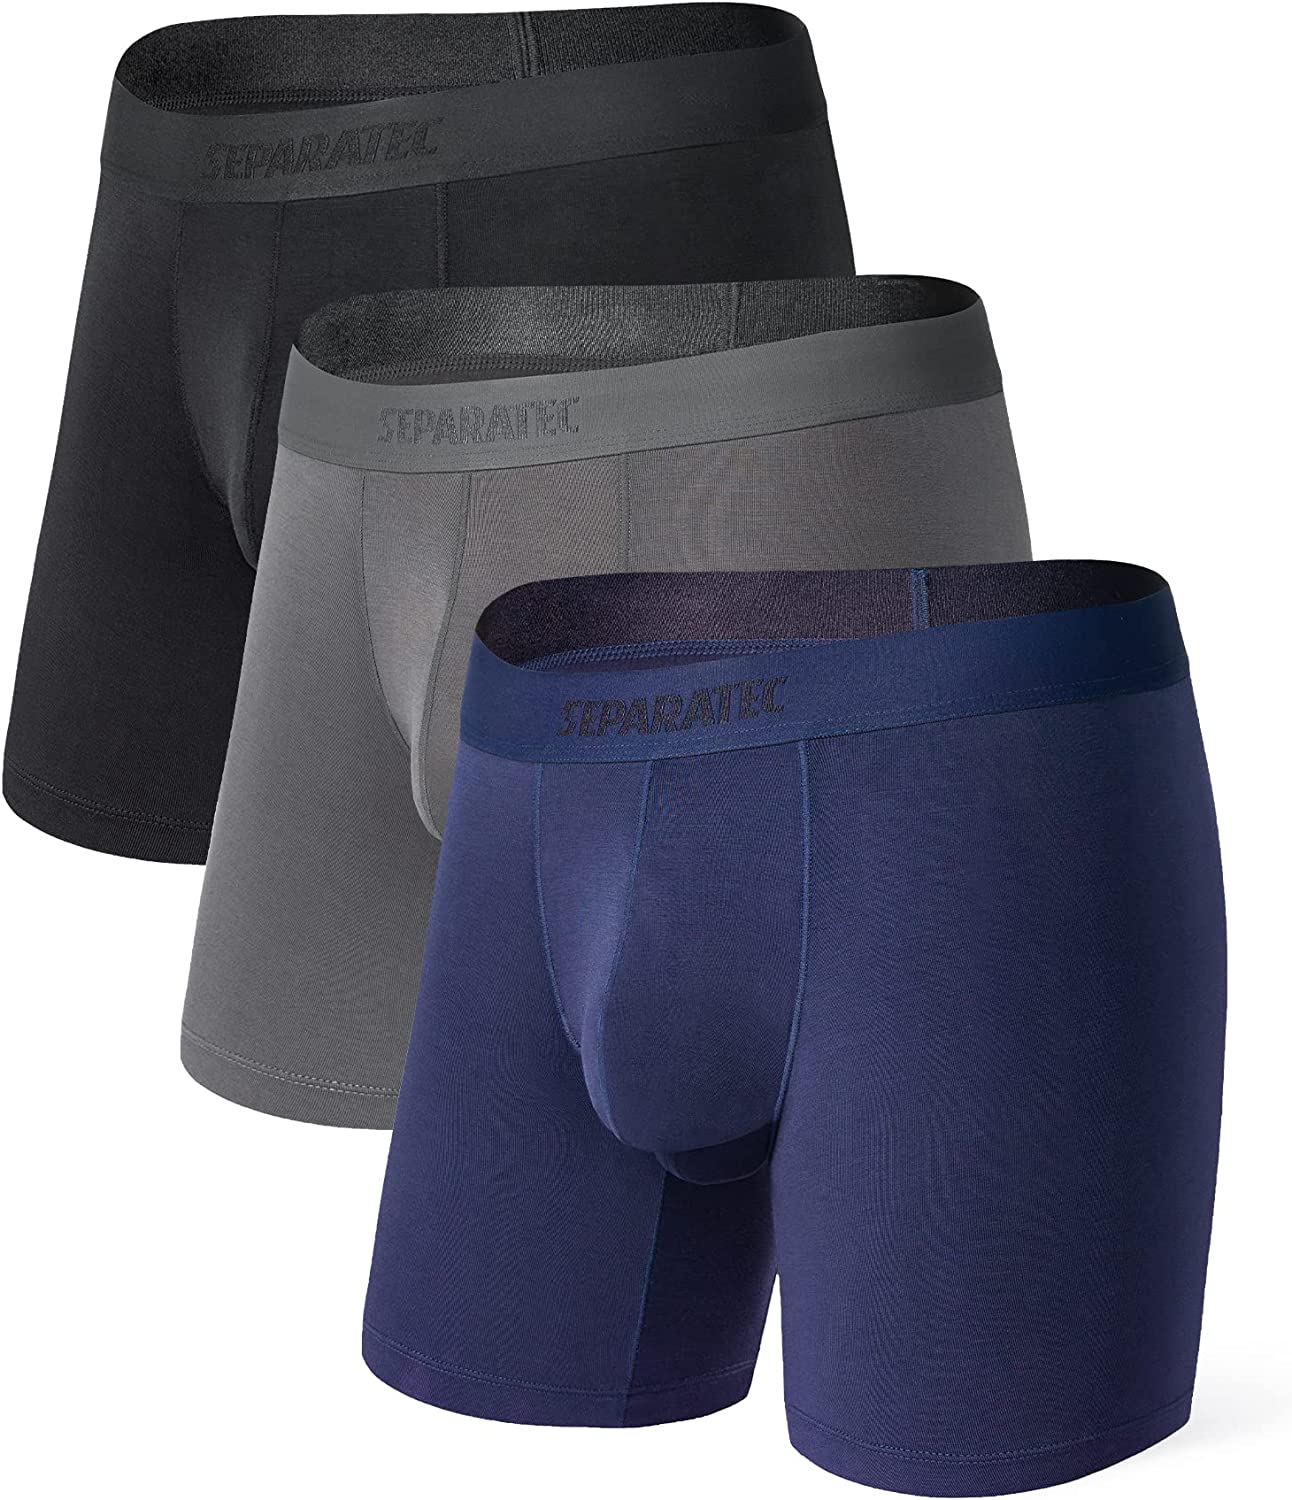 Separatec Men's Underwear 7 Pack Colorful Highly Stretchy - Import It All